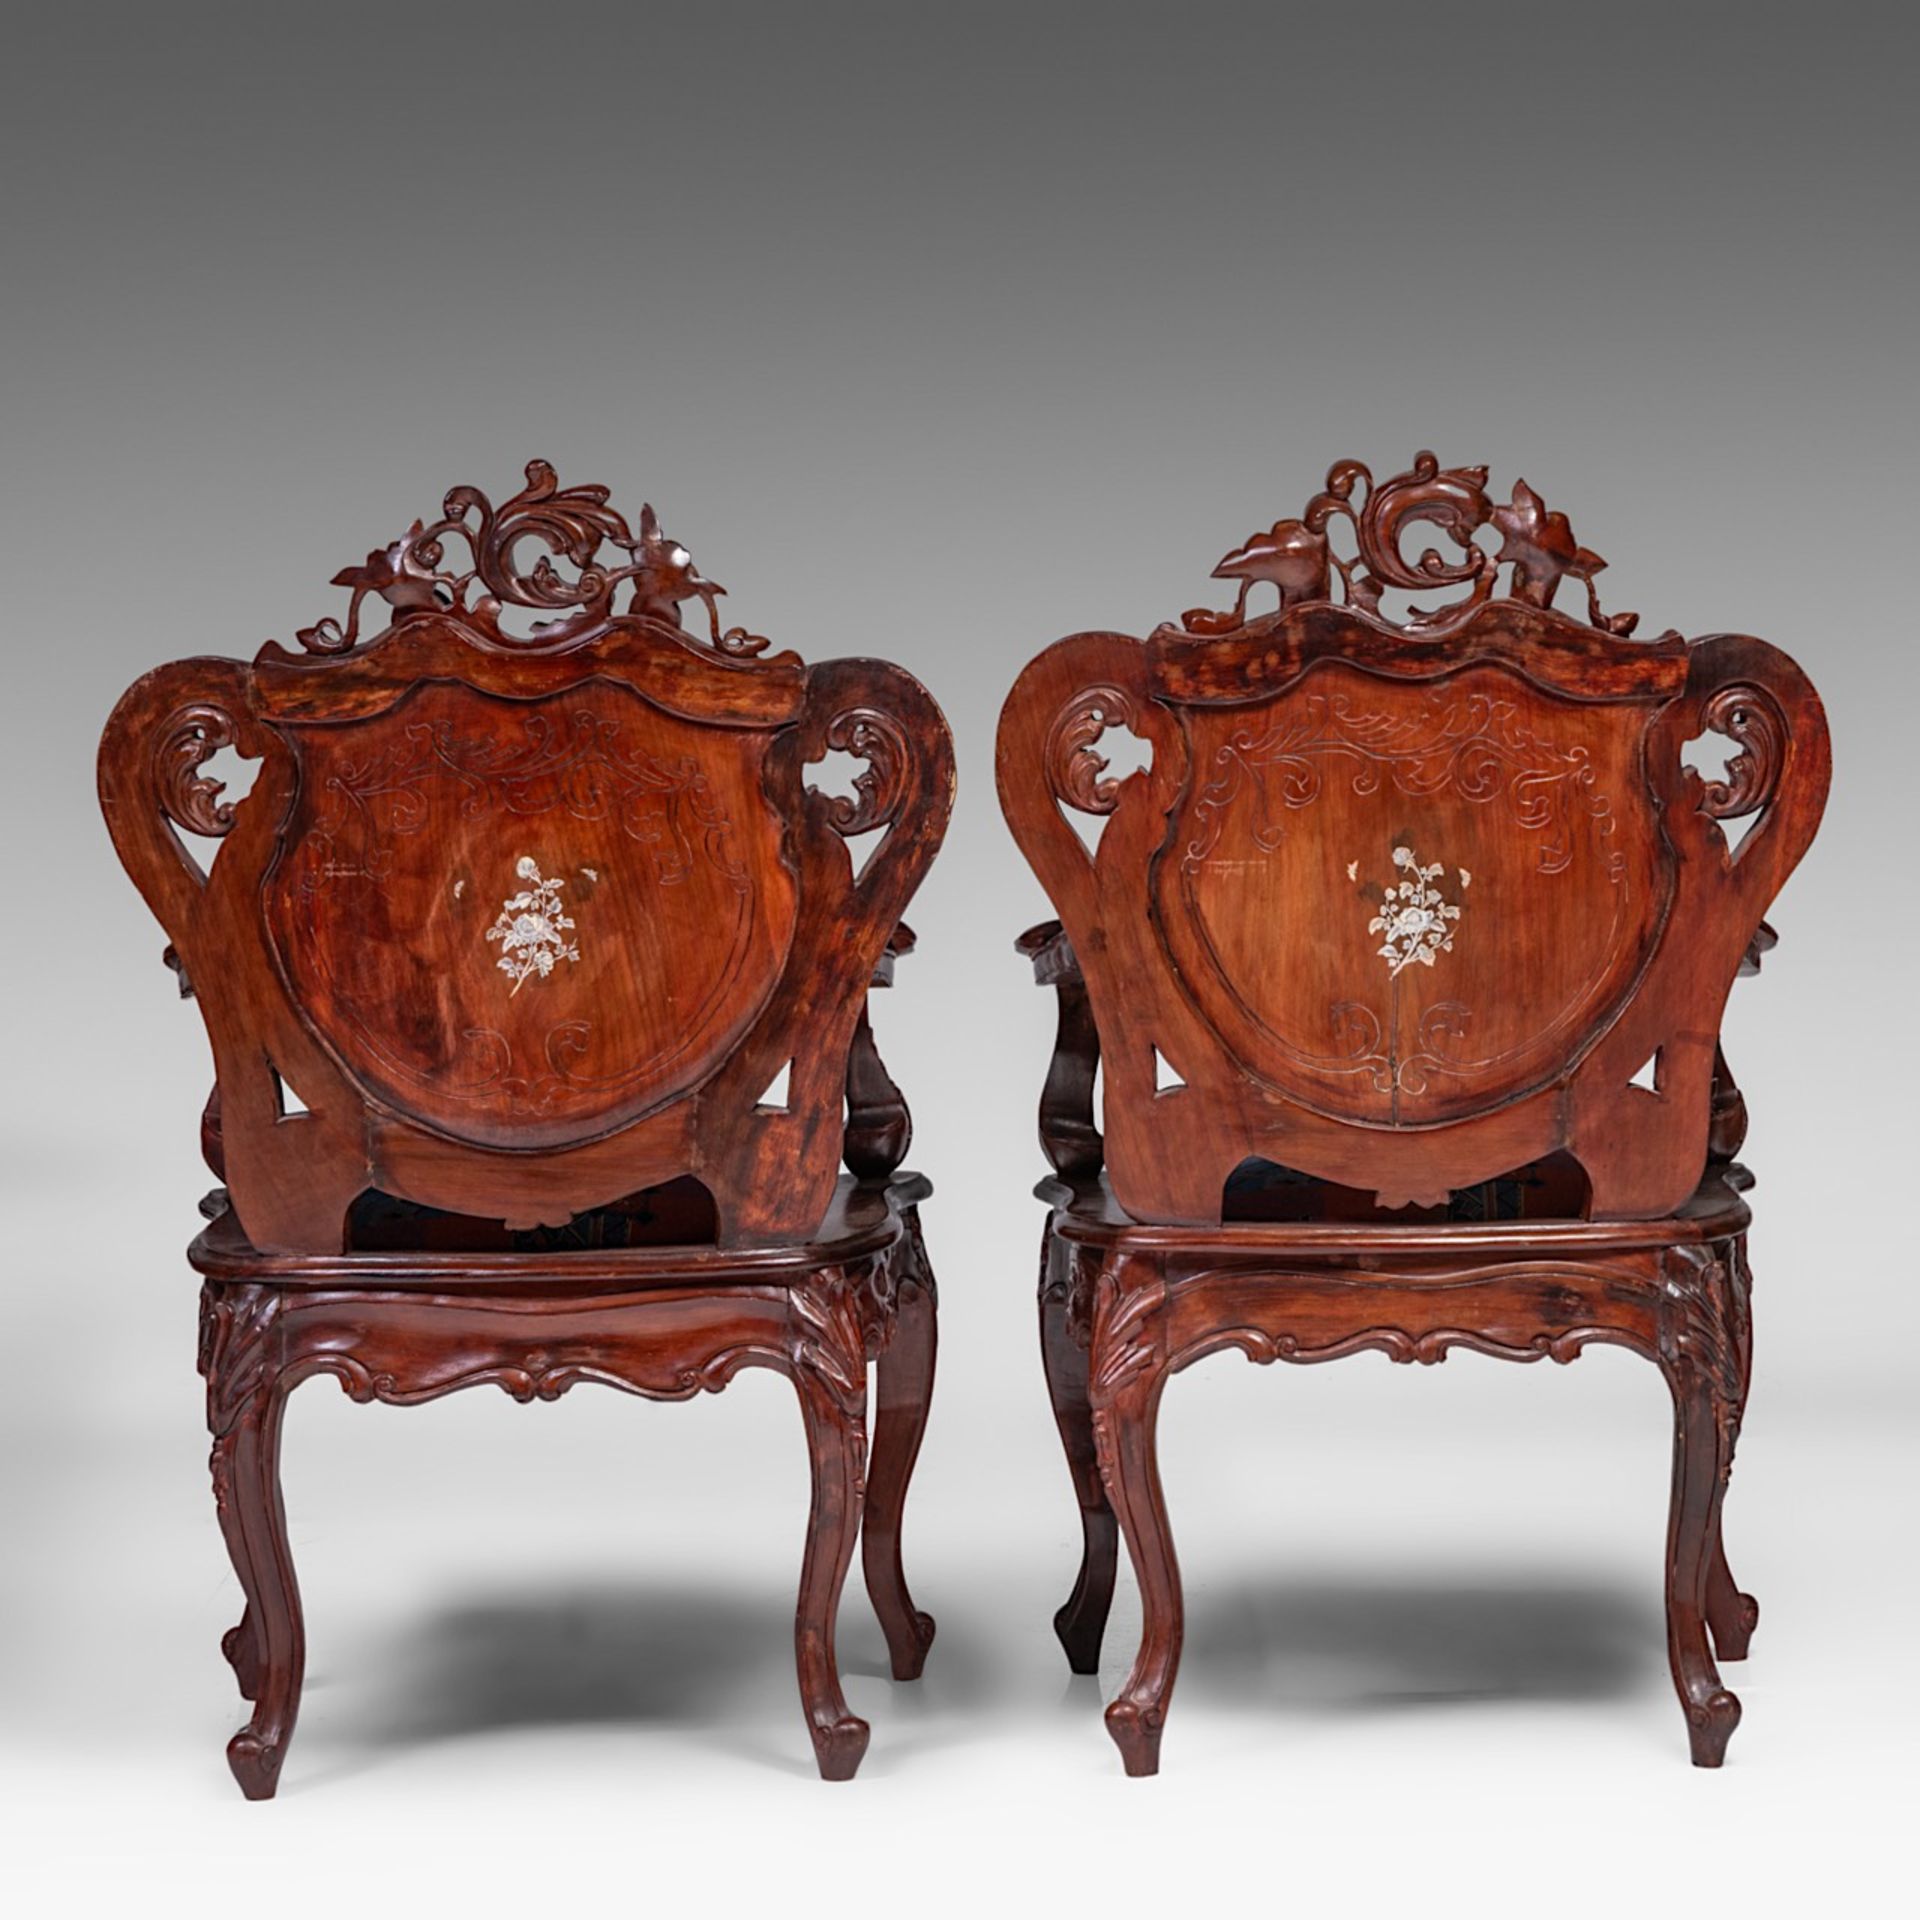 An Anglo-Chinese settee and two chairs, H settee 132 - H chair 108 cm - Image 21 of 24